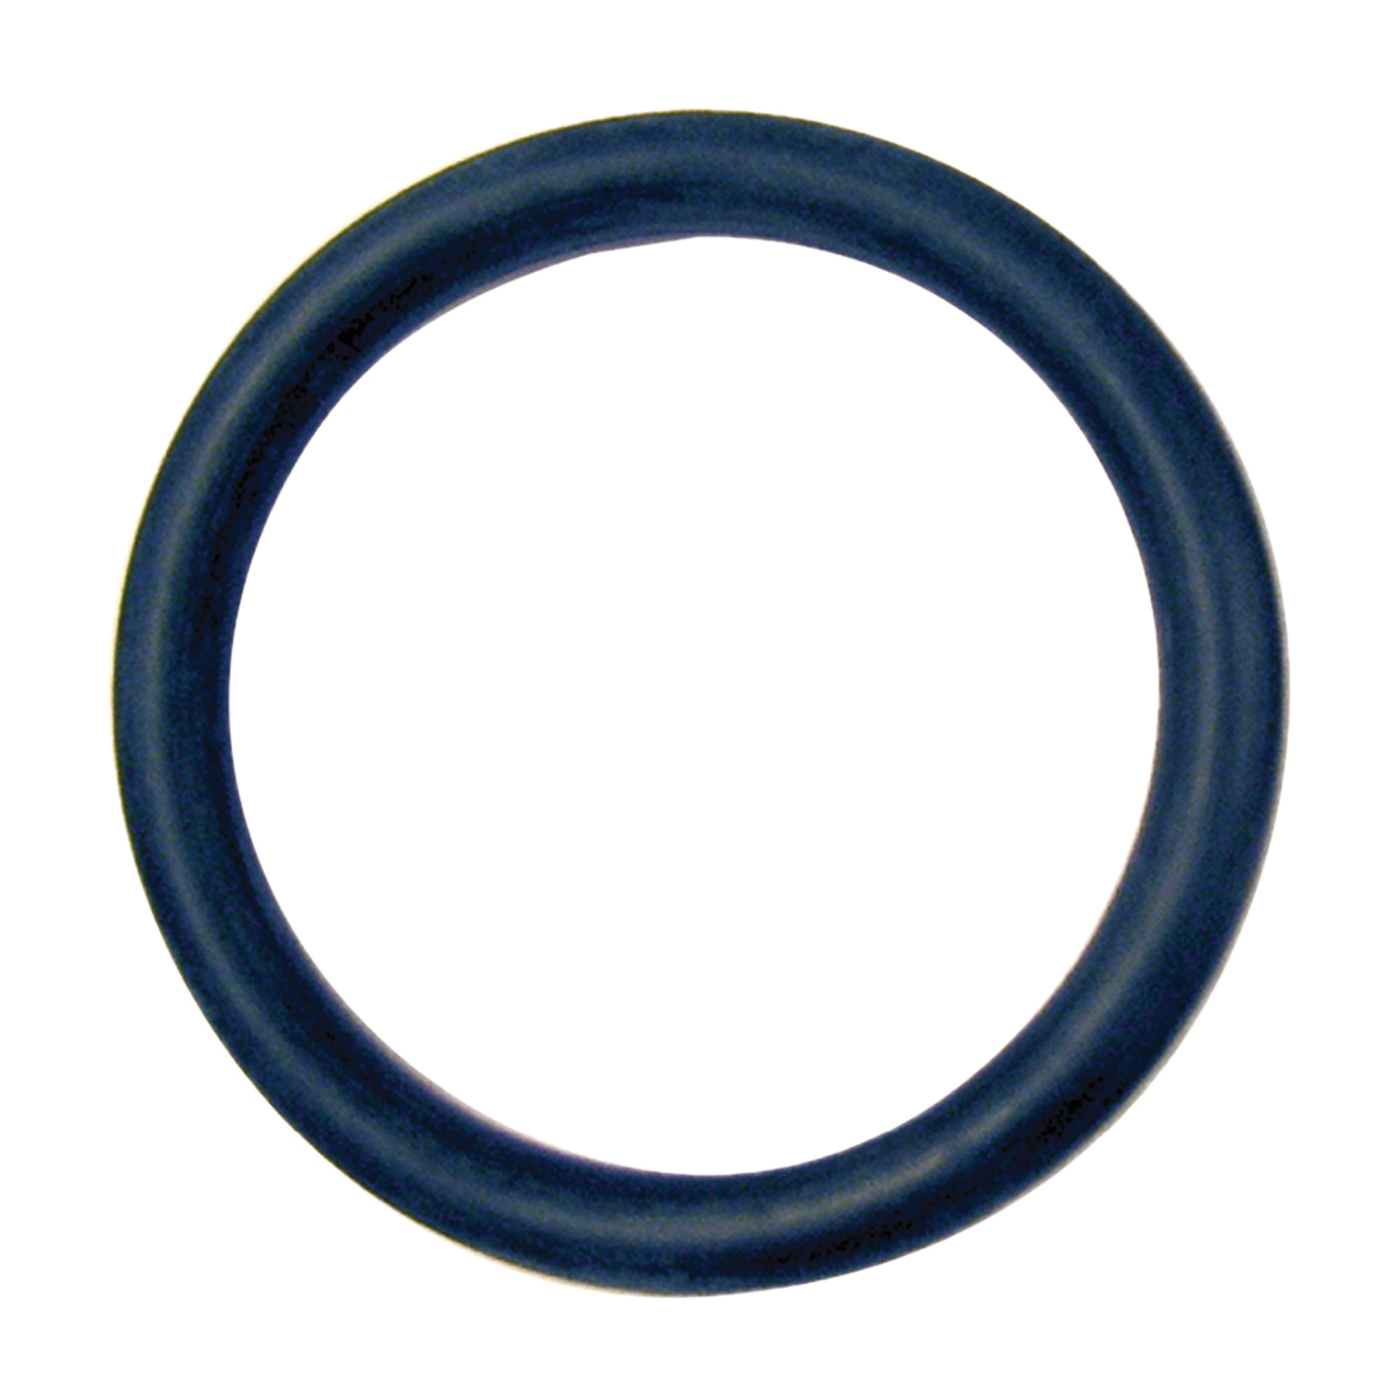 780036 Faucet O-Ring, 5/16 in ID x 13/16 in OD Dia, 1/16 in Thick